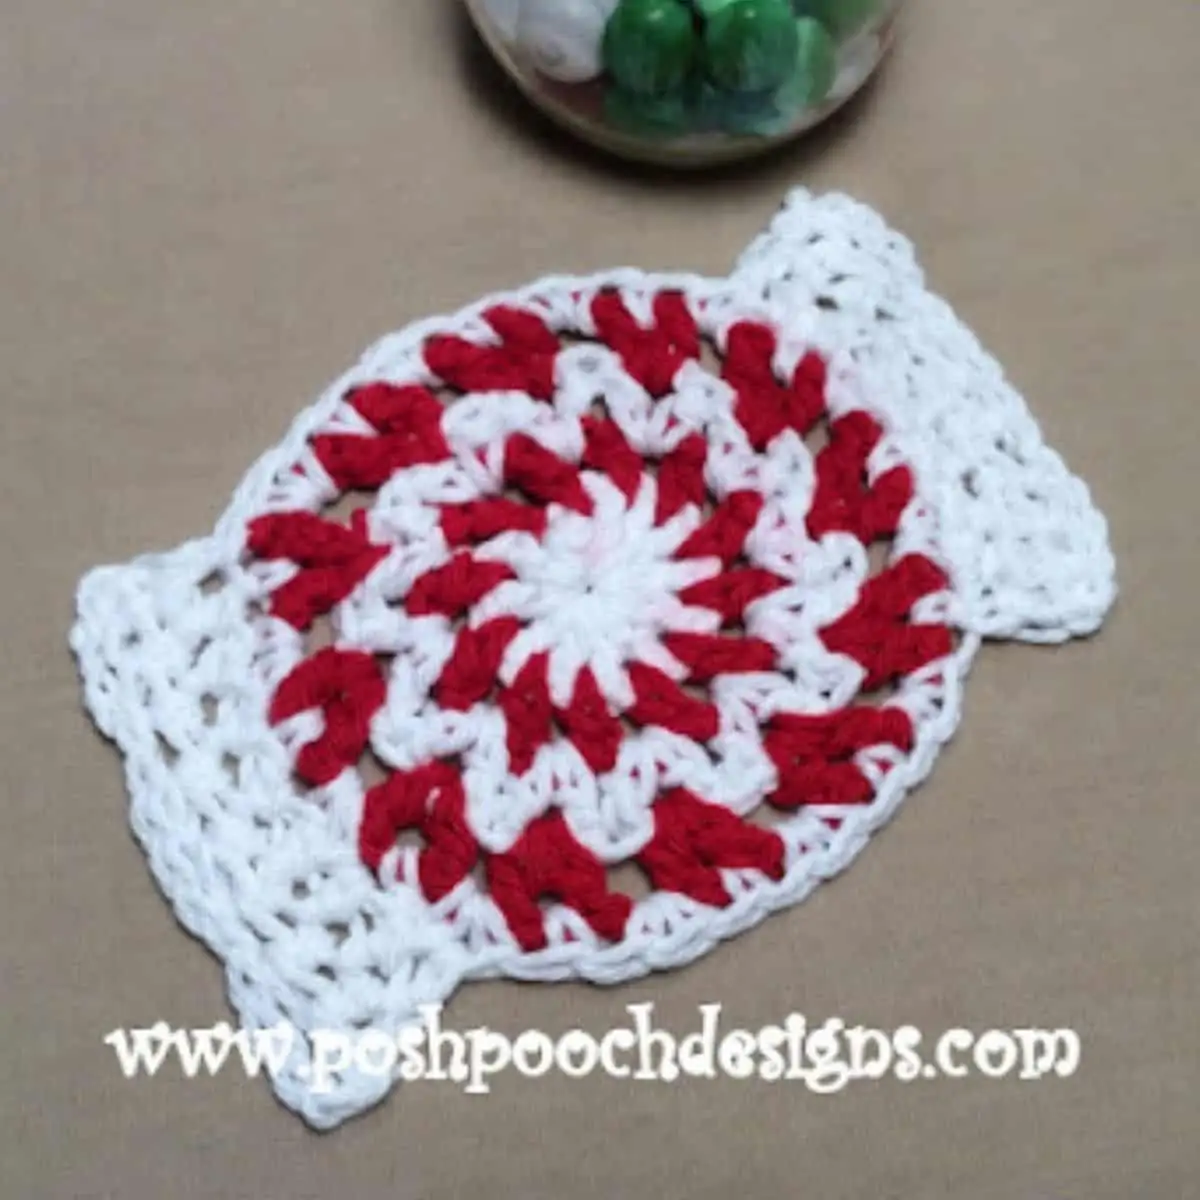 red and white coaster crocheted that looks like a peppermint